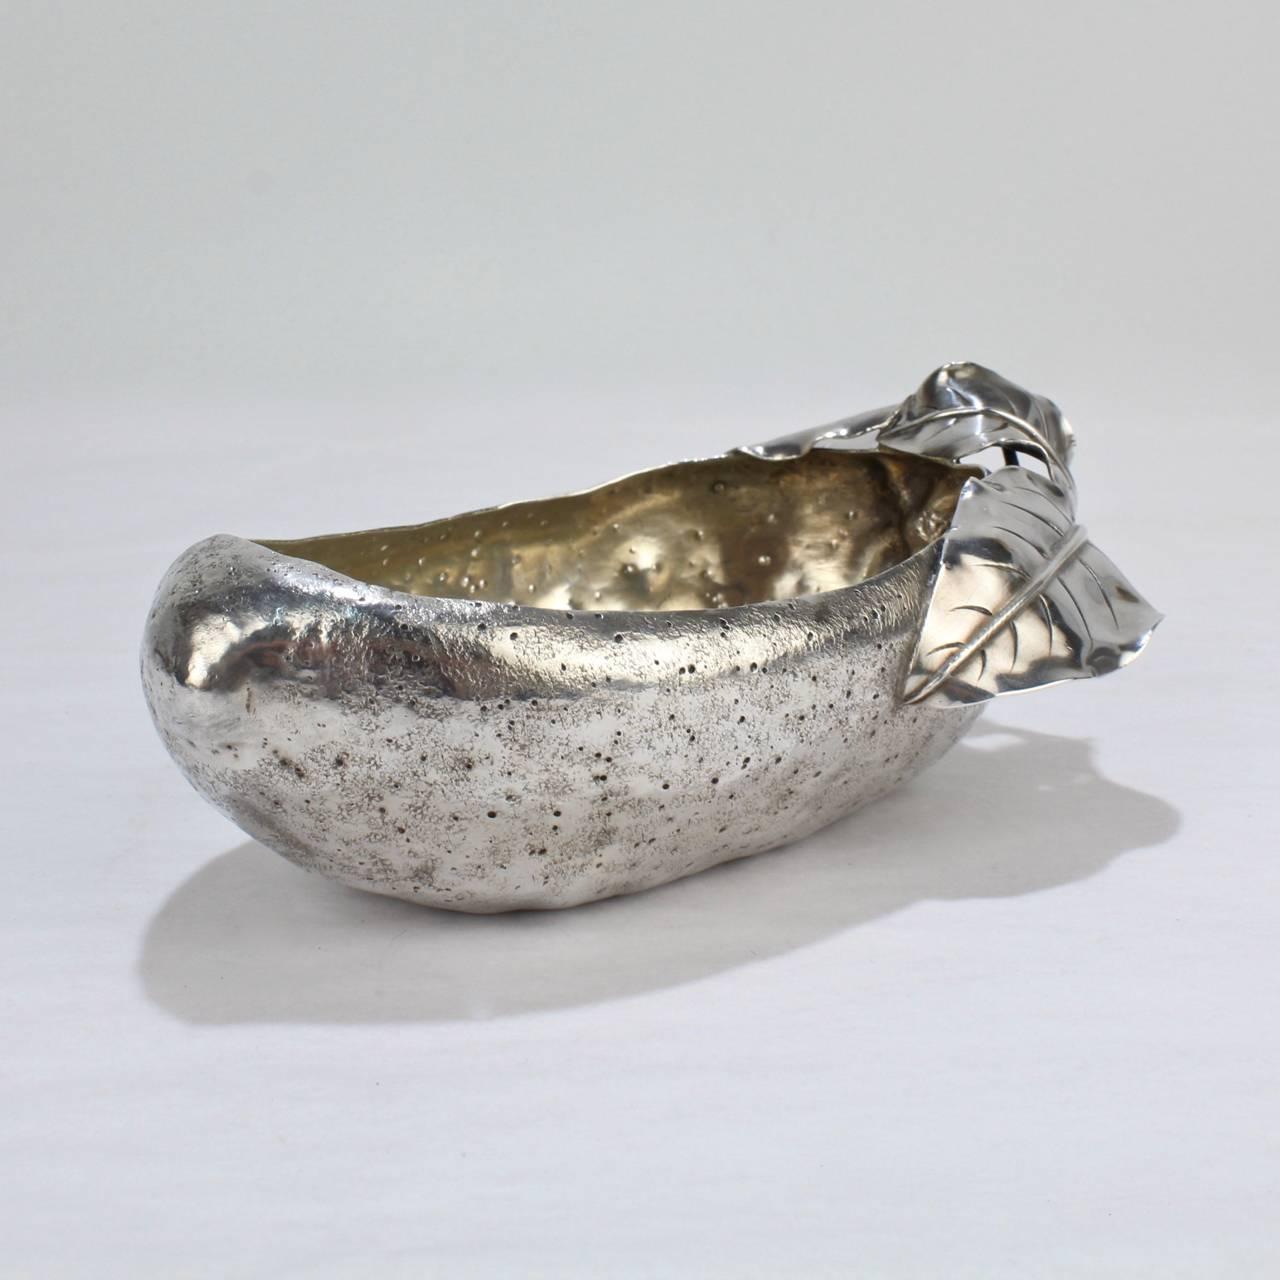 A wonderful, figural antique Gorham sterling silver Olive bowl.

In the form of a large olive with a 'twig and leaves' handle and a mottled and spotted surface. There are traces of the original gilding to the interior of the bowl.

The base is